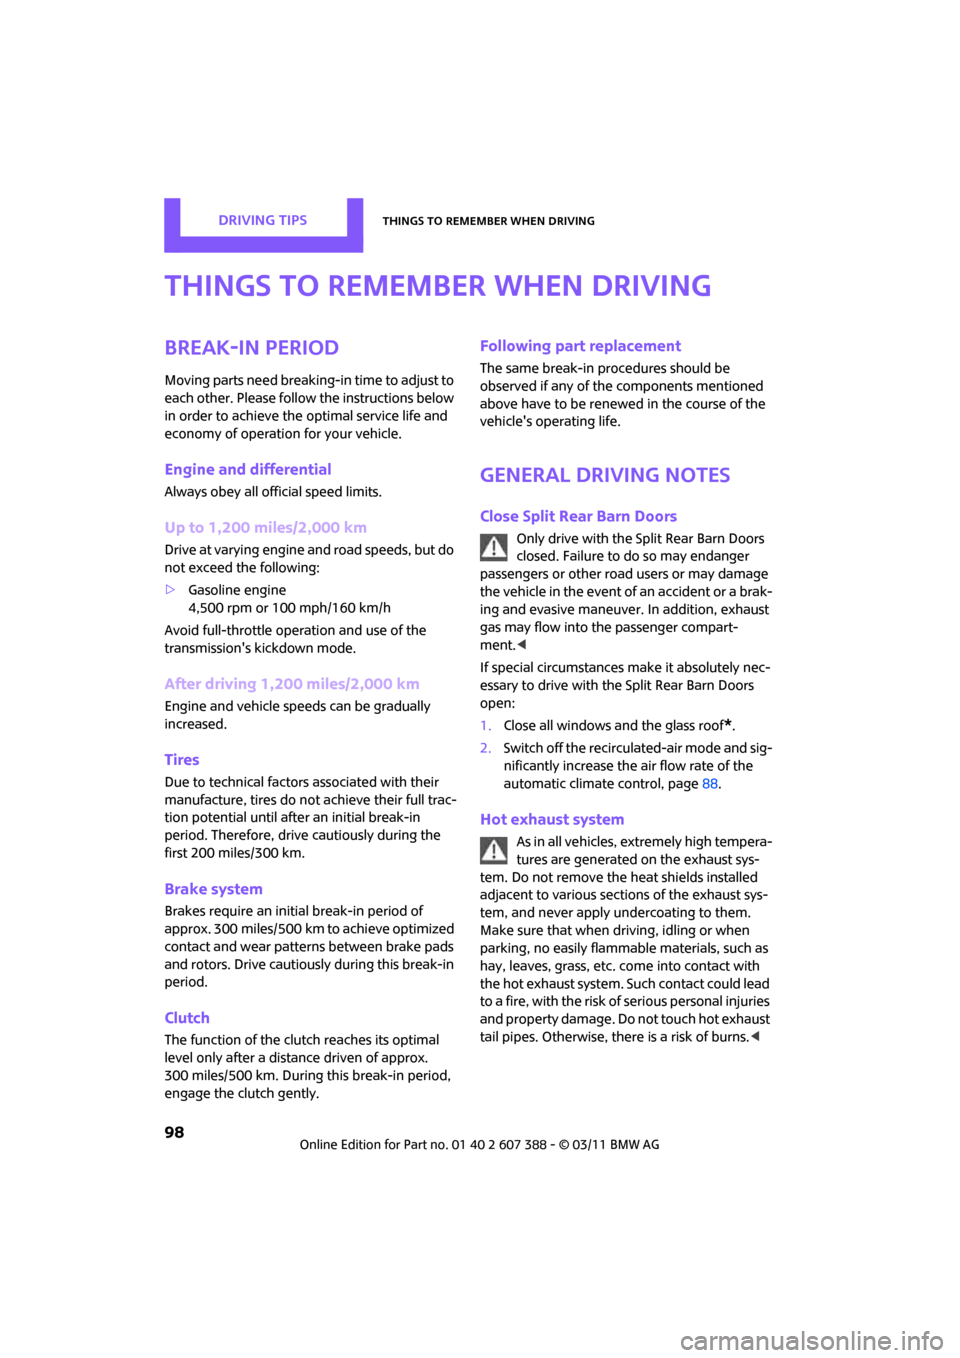 MINI Clubman 2011  Owners Manual (Mini Connected) DRIVING TIPSThings to remember when driving
98
Things to remember when driving
Break-in period
Moving parts need breaking-in time to adjust to 
each other. Please follow the instructions below 
in ord